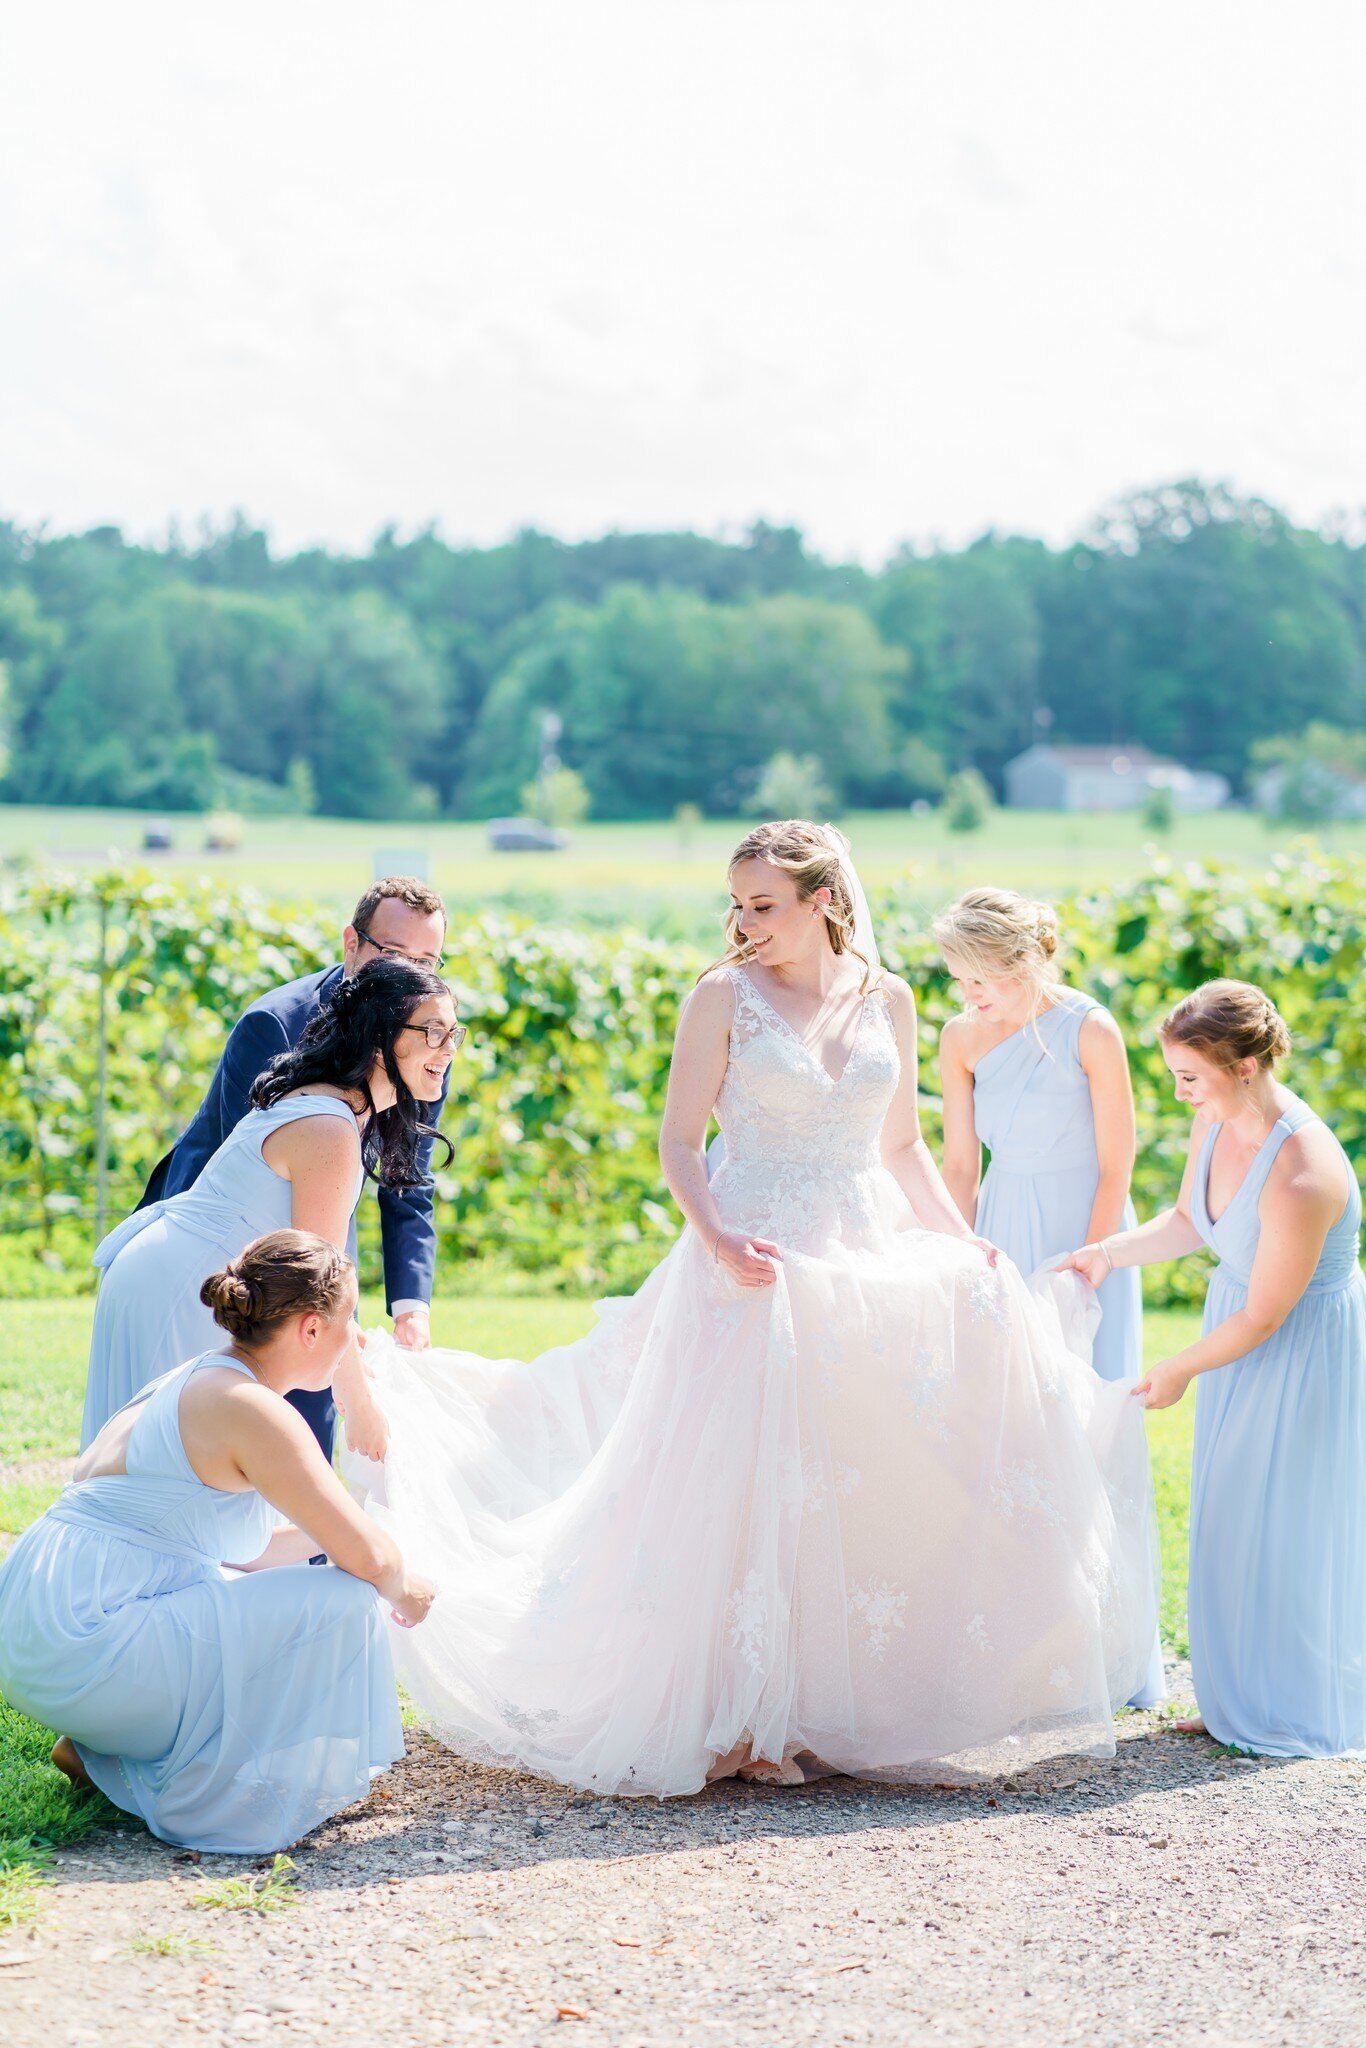 Bride getting ready with bridal party before ceremony